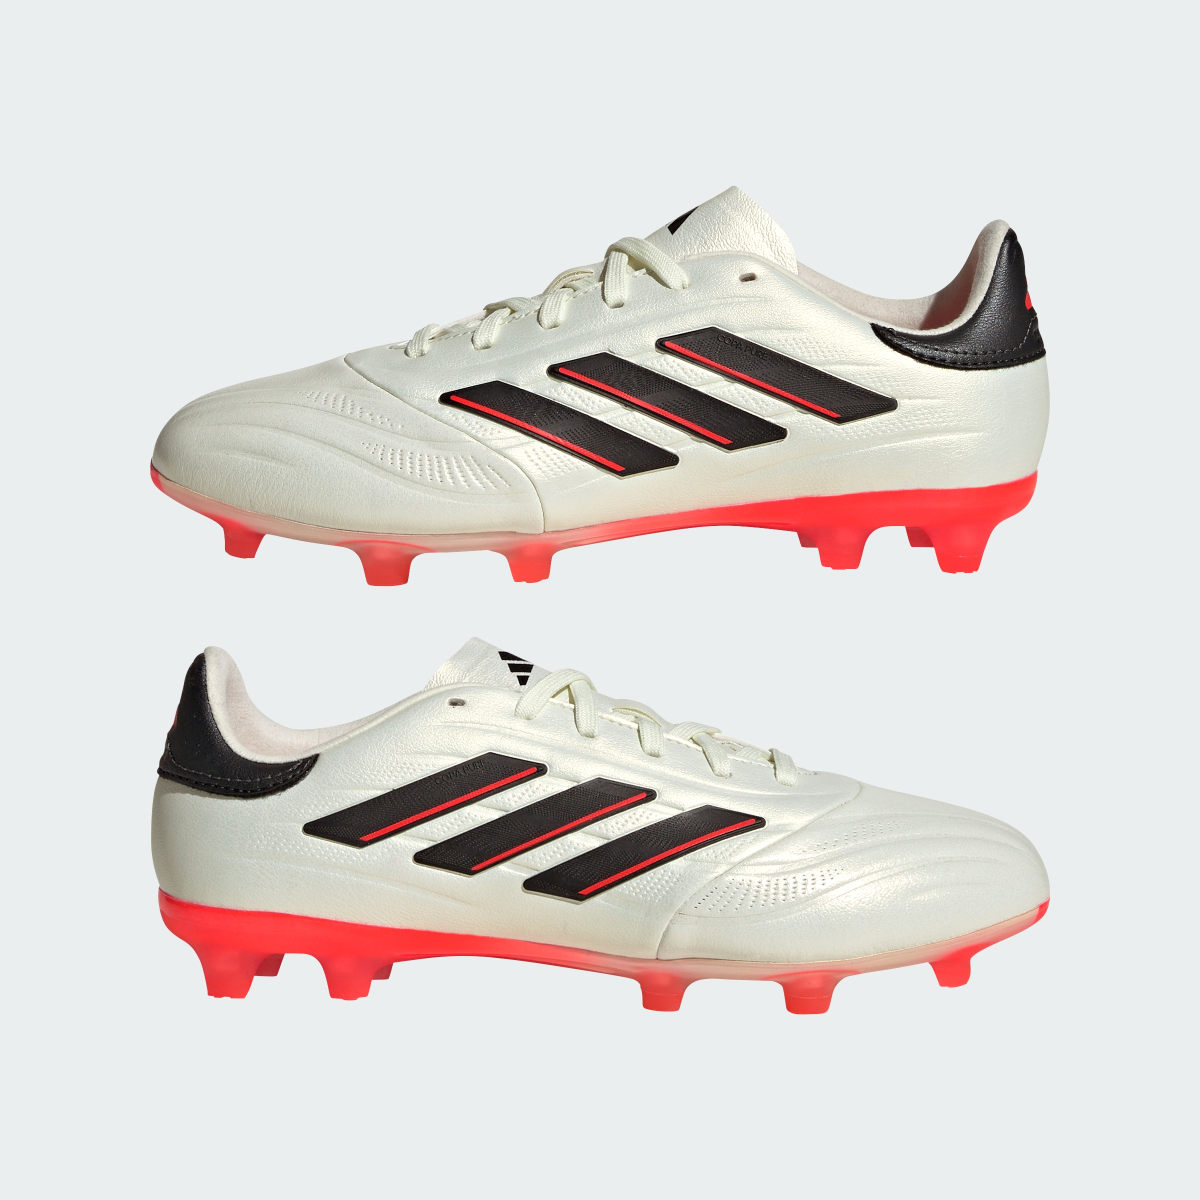 Adidas Copa Pure II Elite Firm Ground Cleats. 8